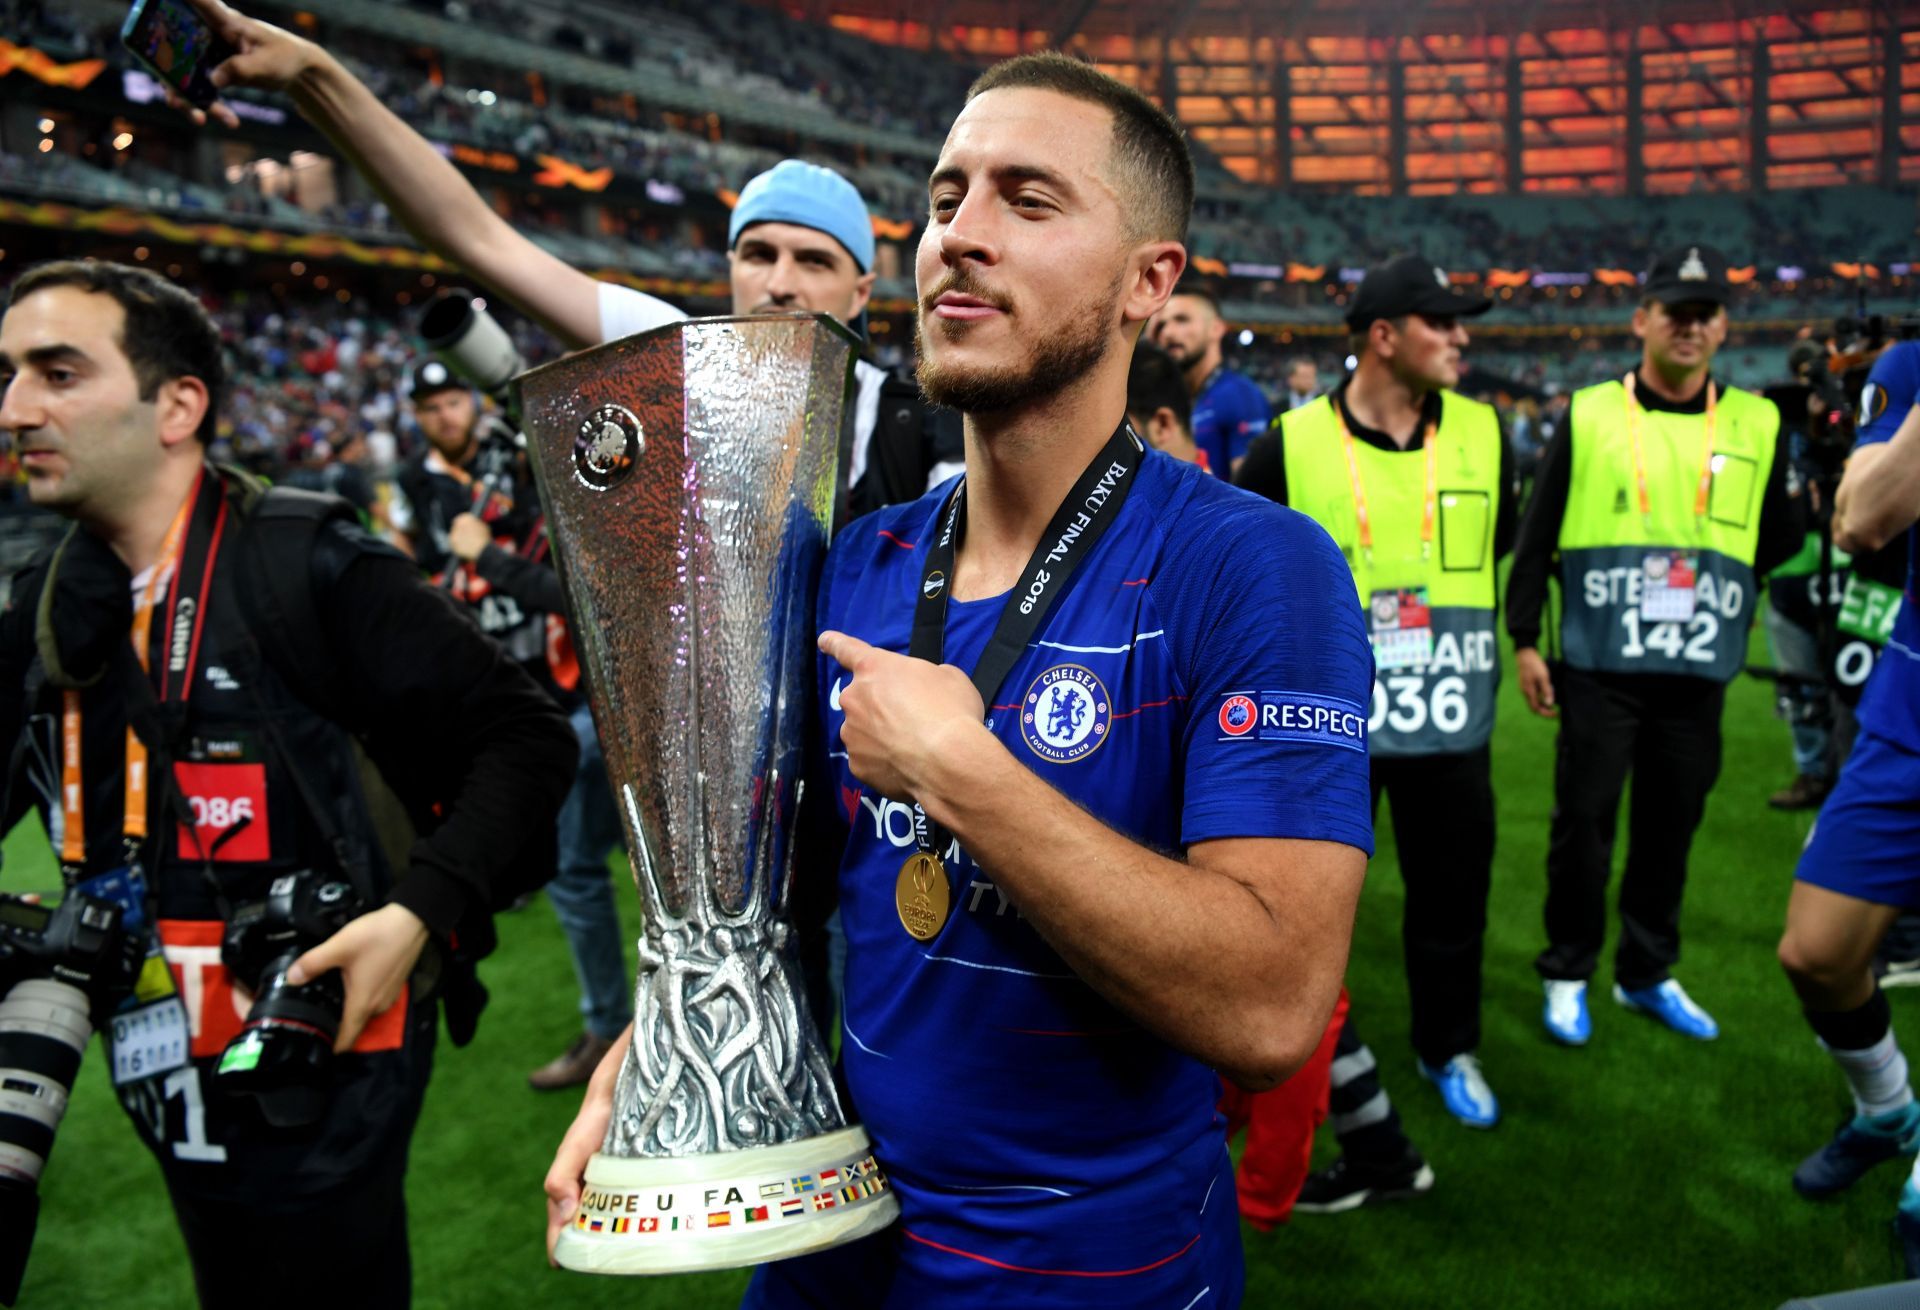 Hazard won the Europa League in his last game for Chelsea